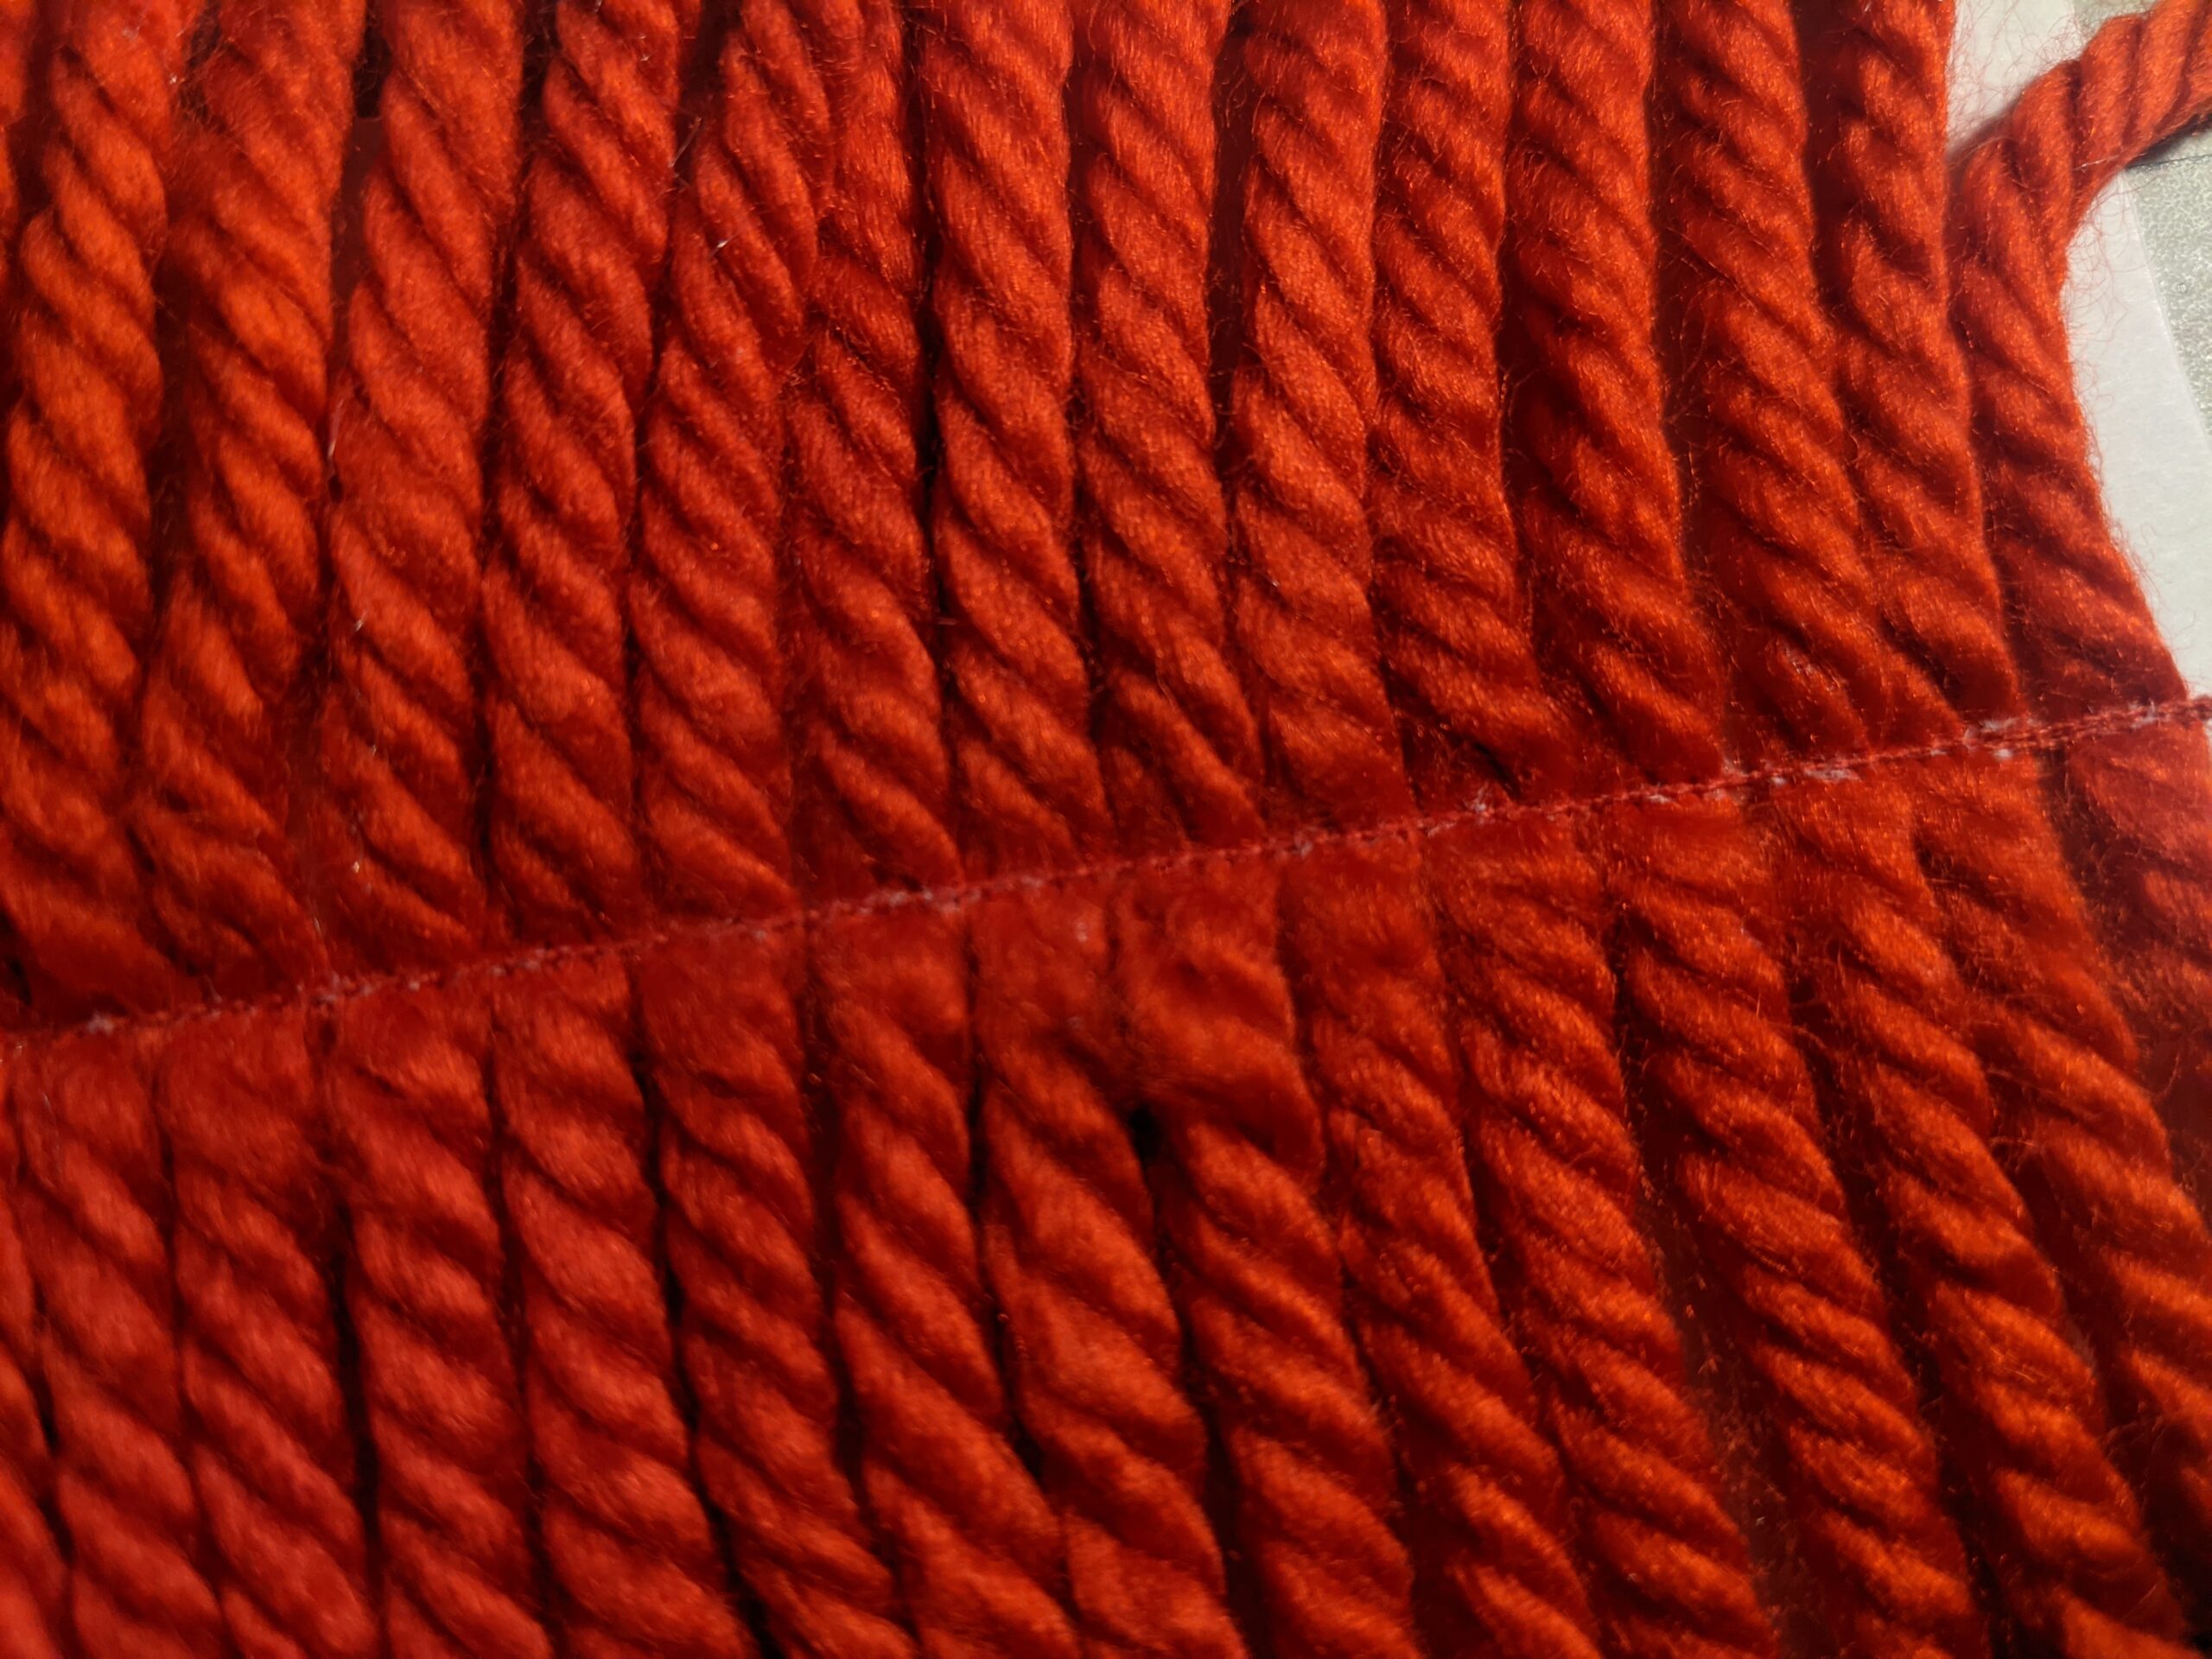 Red yarn sewn together side-by-side